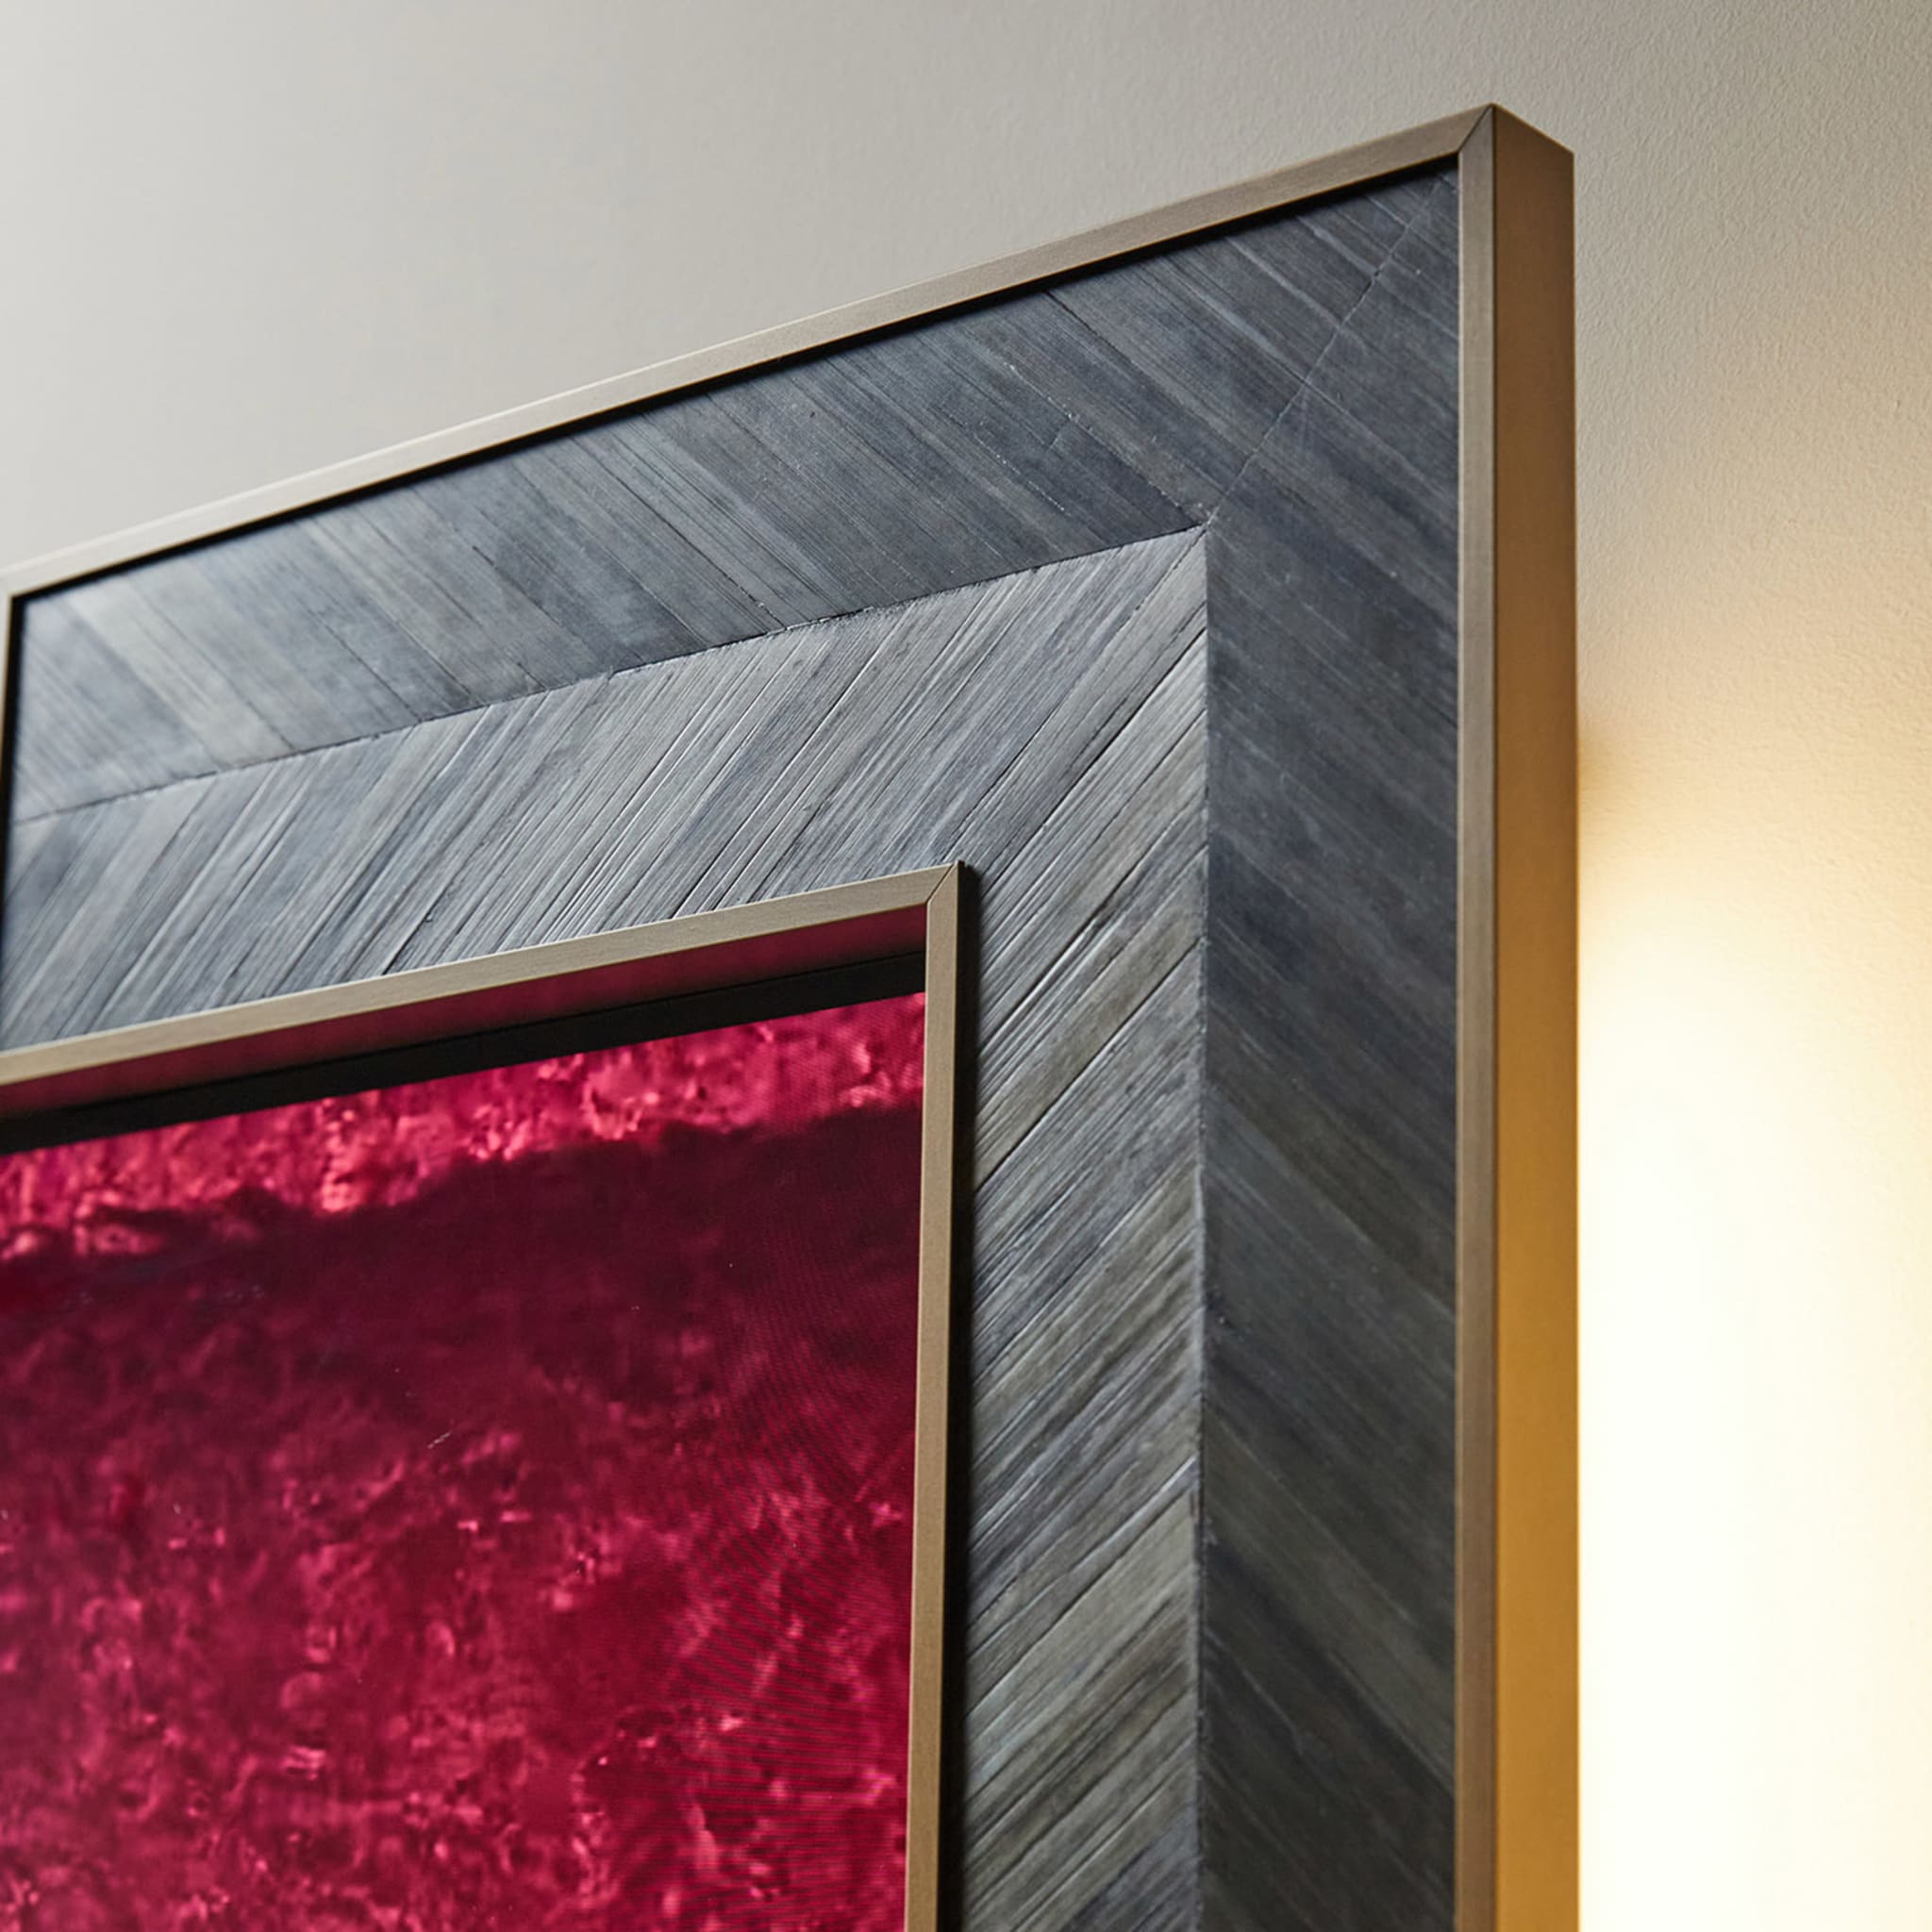 Grisaglia Wall Mirror with Integrated 43" TV by Alfredo Colombo - Alternative view 1